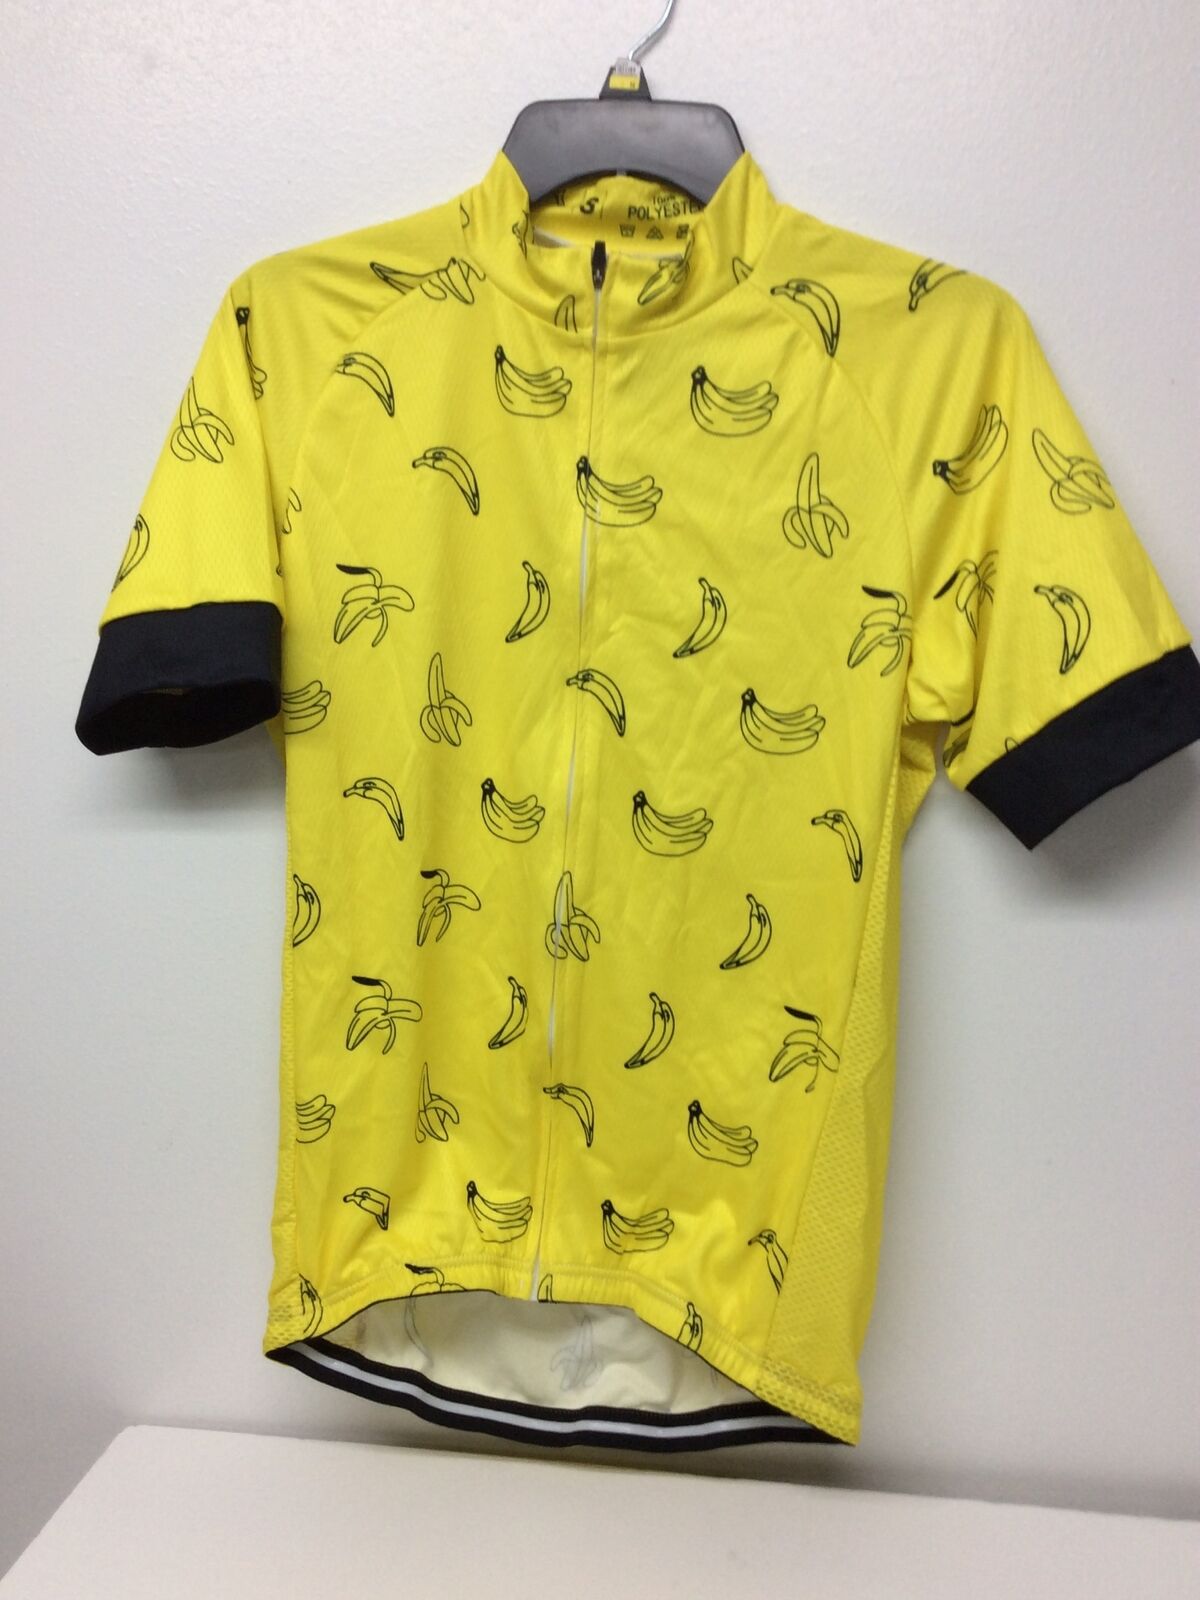 Challenge the lowest price of Japan ☆ Men's ! Super beauty product restock quality top! Must Be Bananas Cycling Jersey Short S Size Sleeve